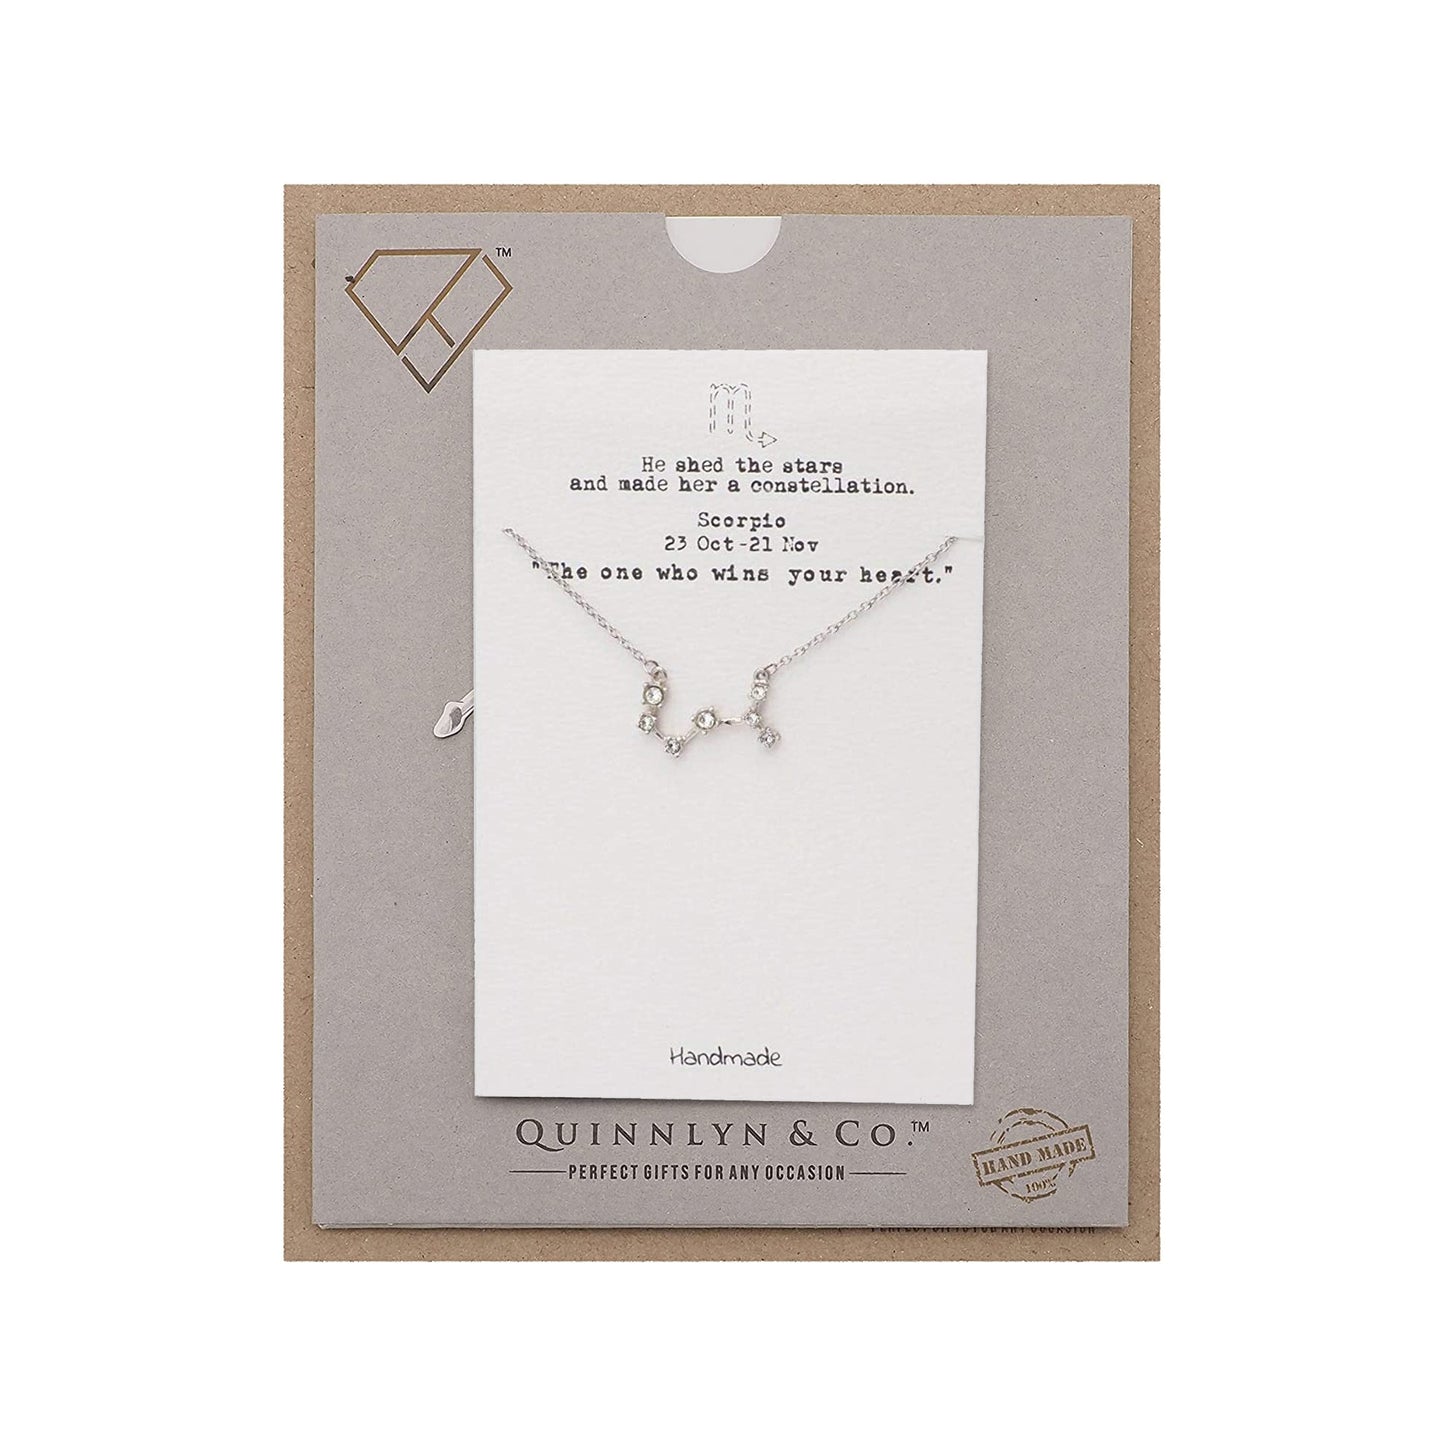 Quinnlyn & Co. Scorpio Zodiac Pattern Swarovzki Pendant Necklace, Birthday Gifts for Women, Teens and Girls with Inspirational Greeting Card